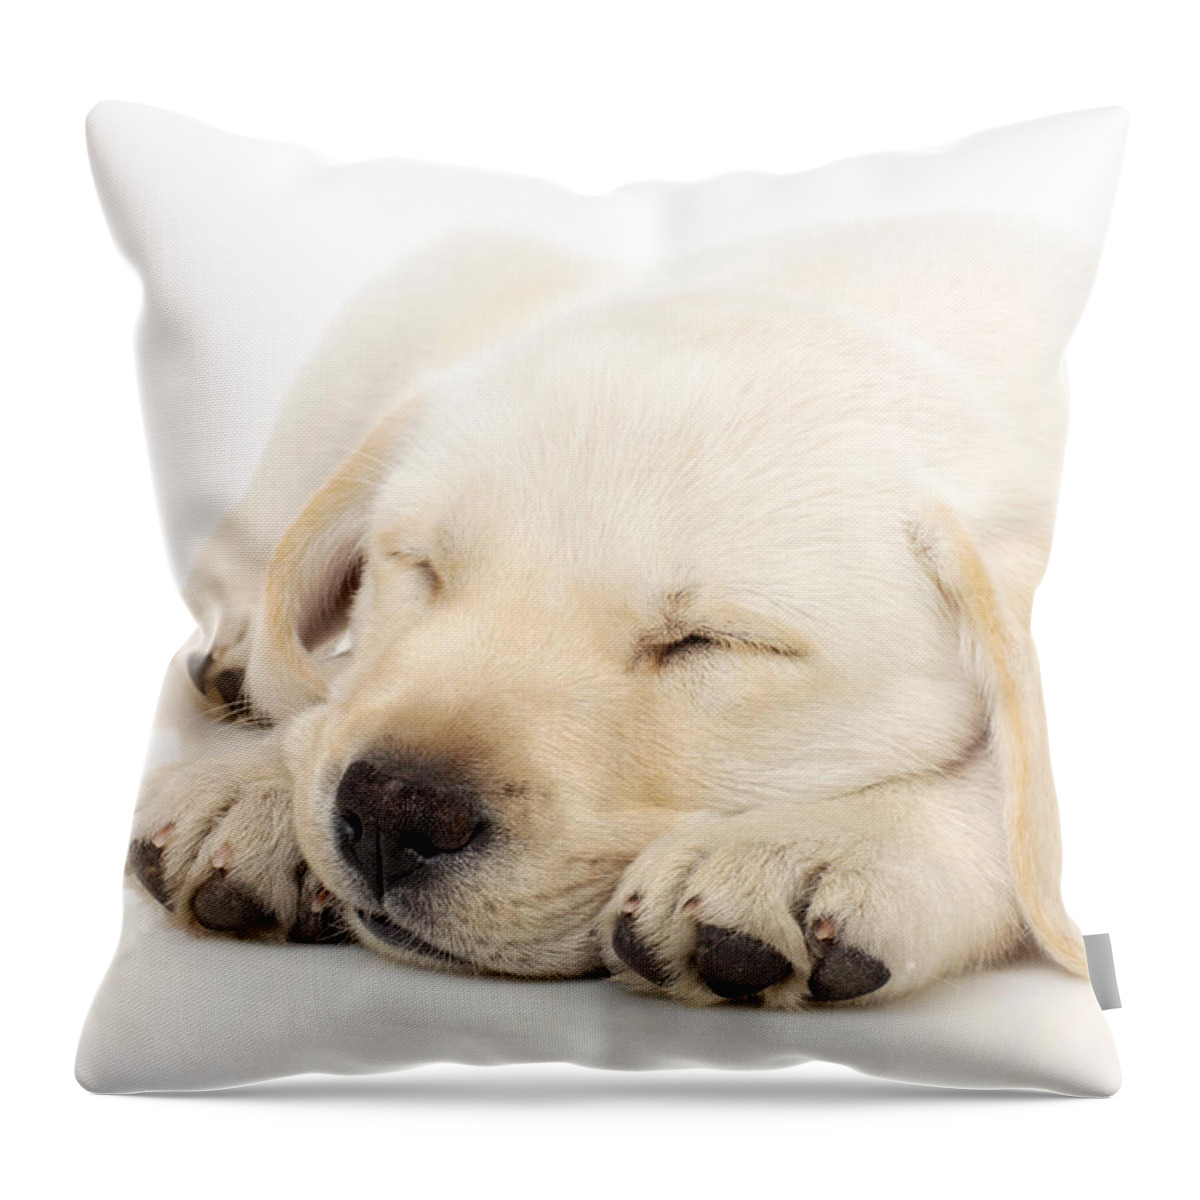 Adorable Throw Pillow featuring the photograph Puppy sleeping on paws by Johan Swanepoel